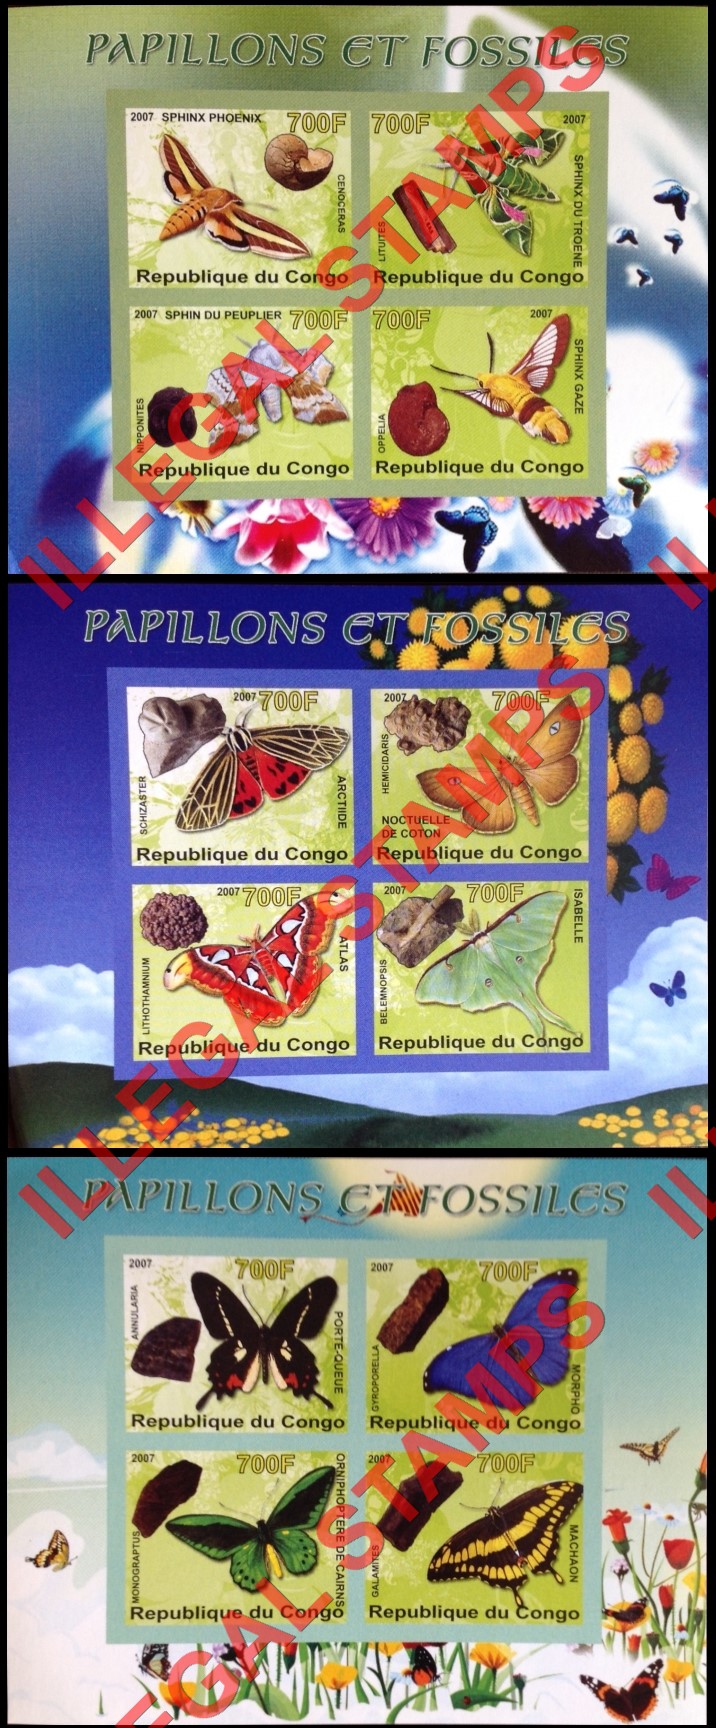 Congo Republic 2007 Butterflies and Fossils Illegal Stamp Souvenir Sheets of 4